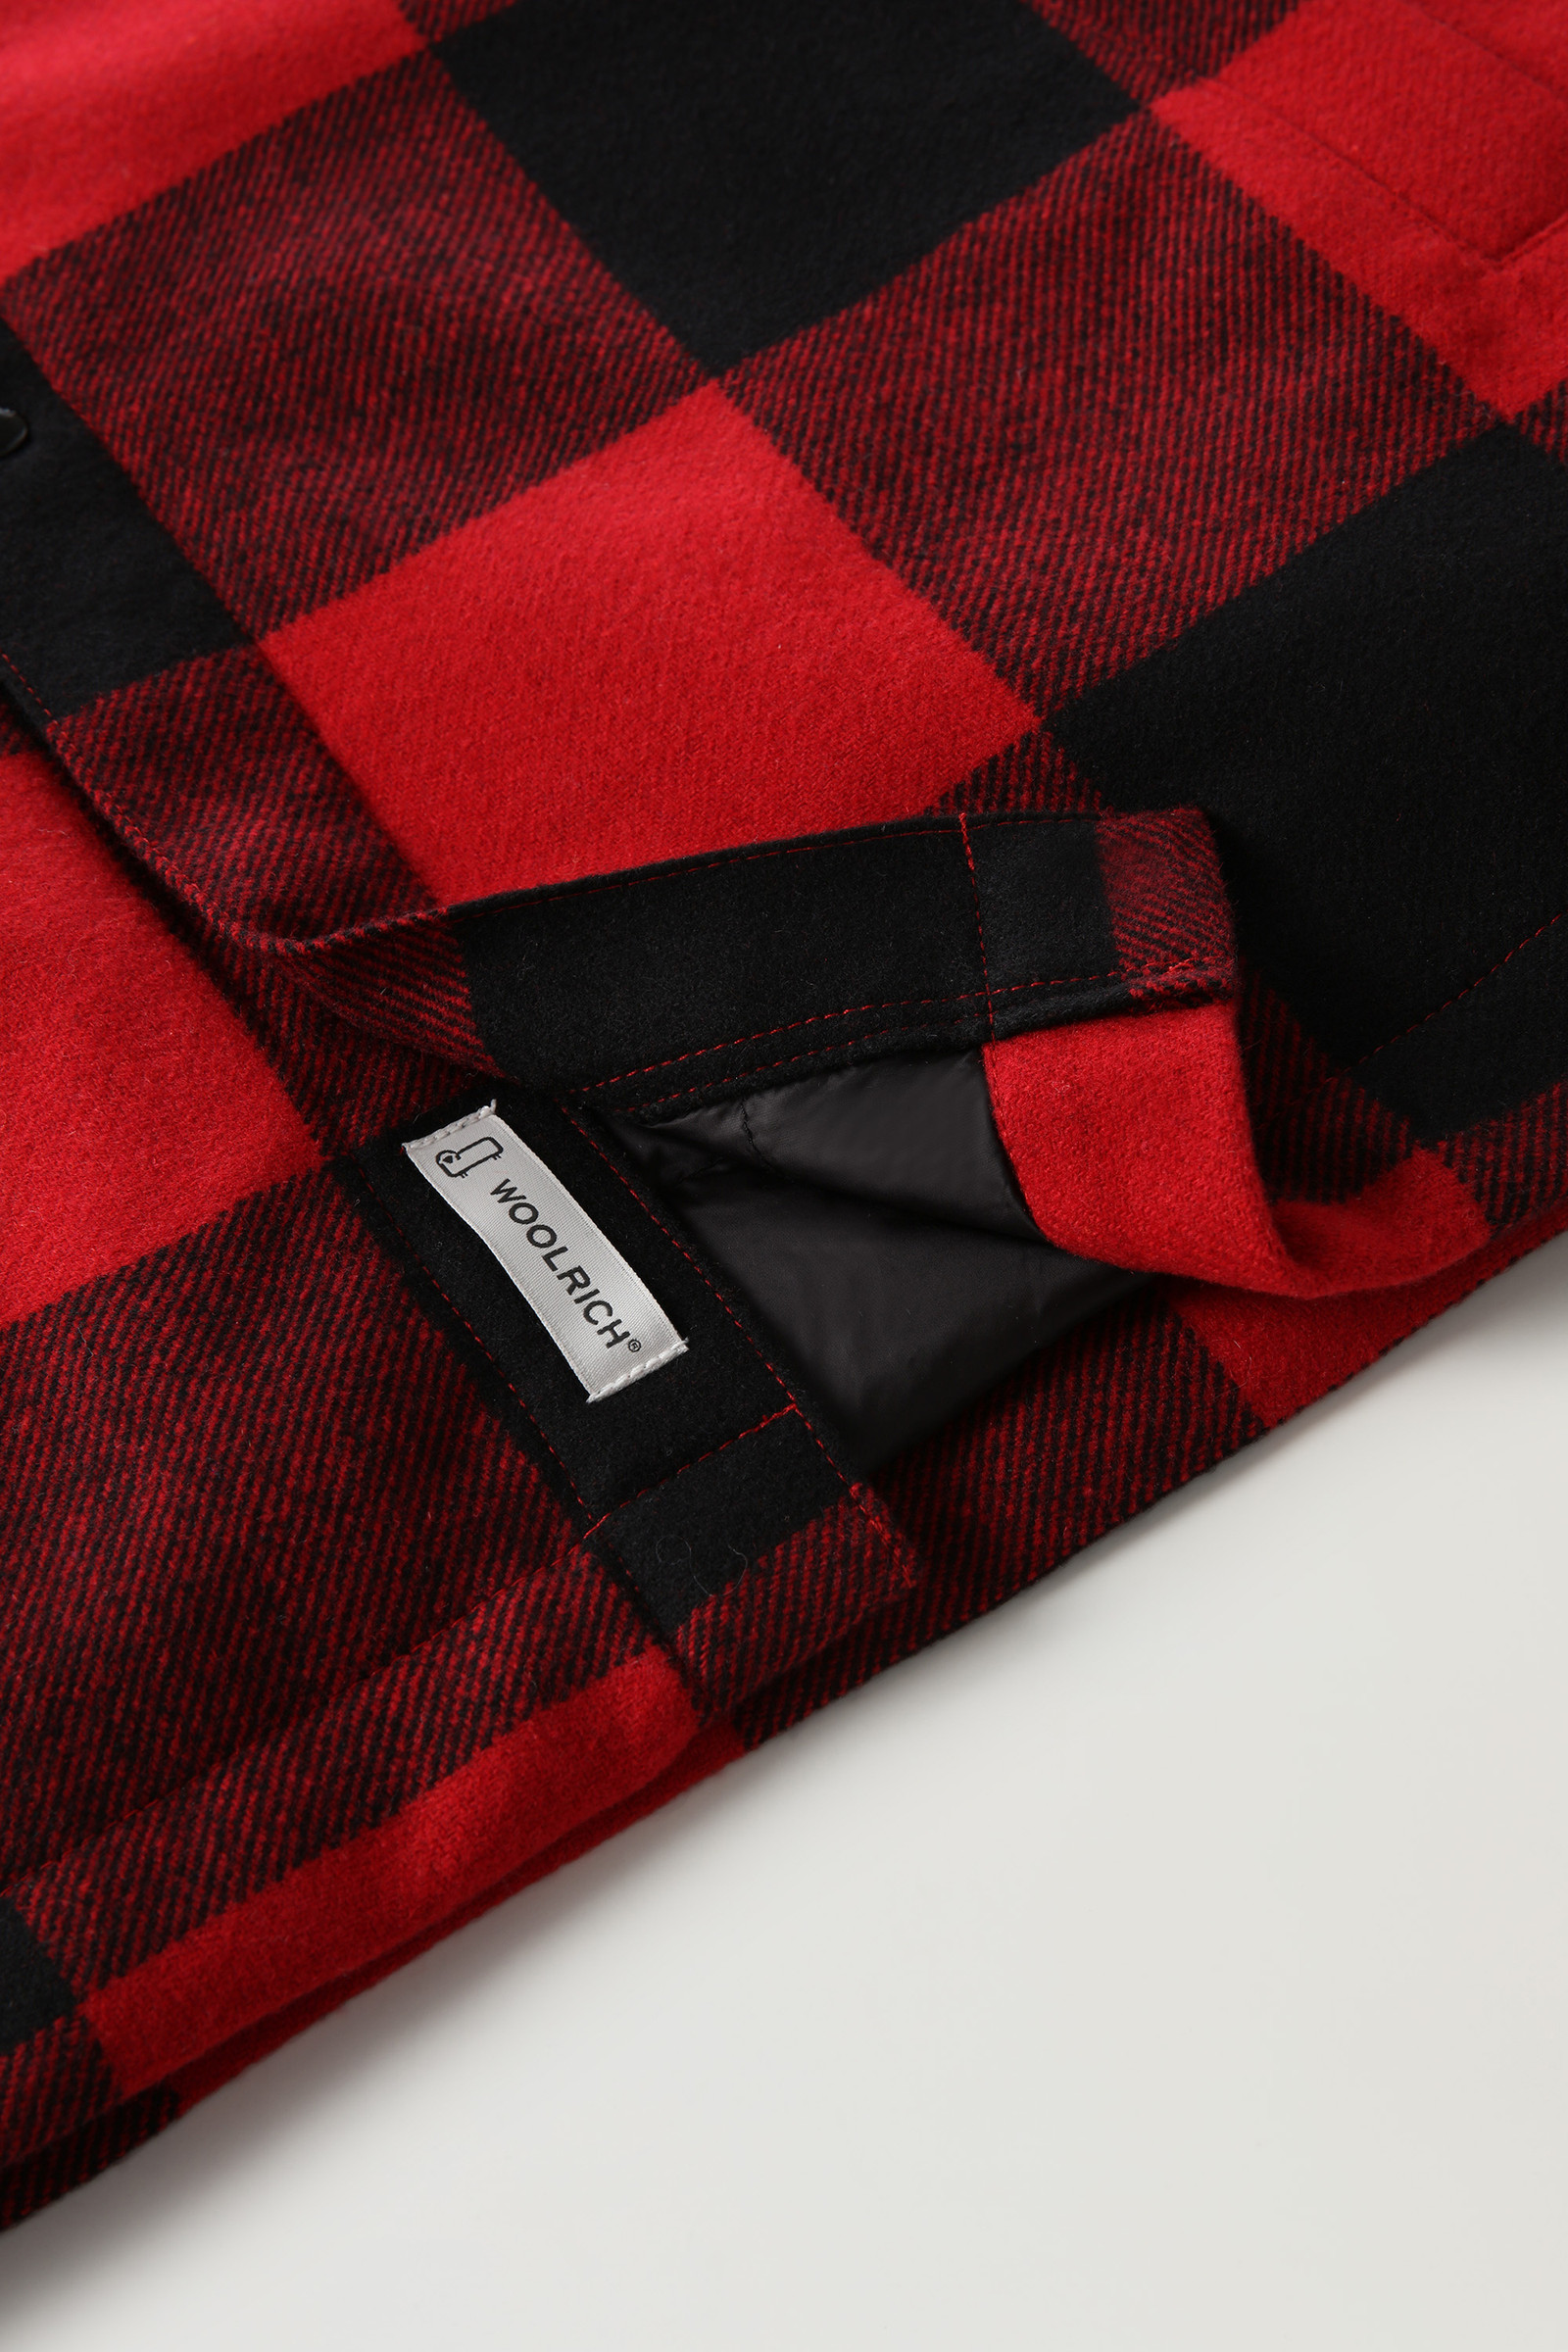 Quilted Alaskan Check Overshirt in Recycled Wool - Men - Red